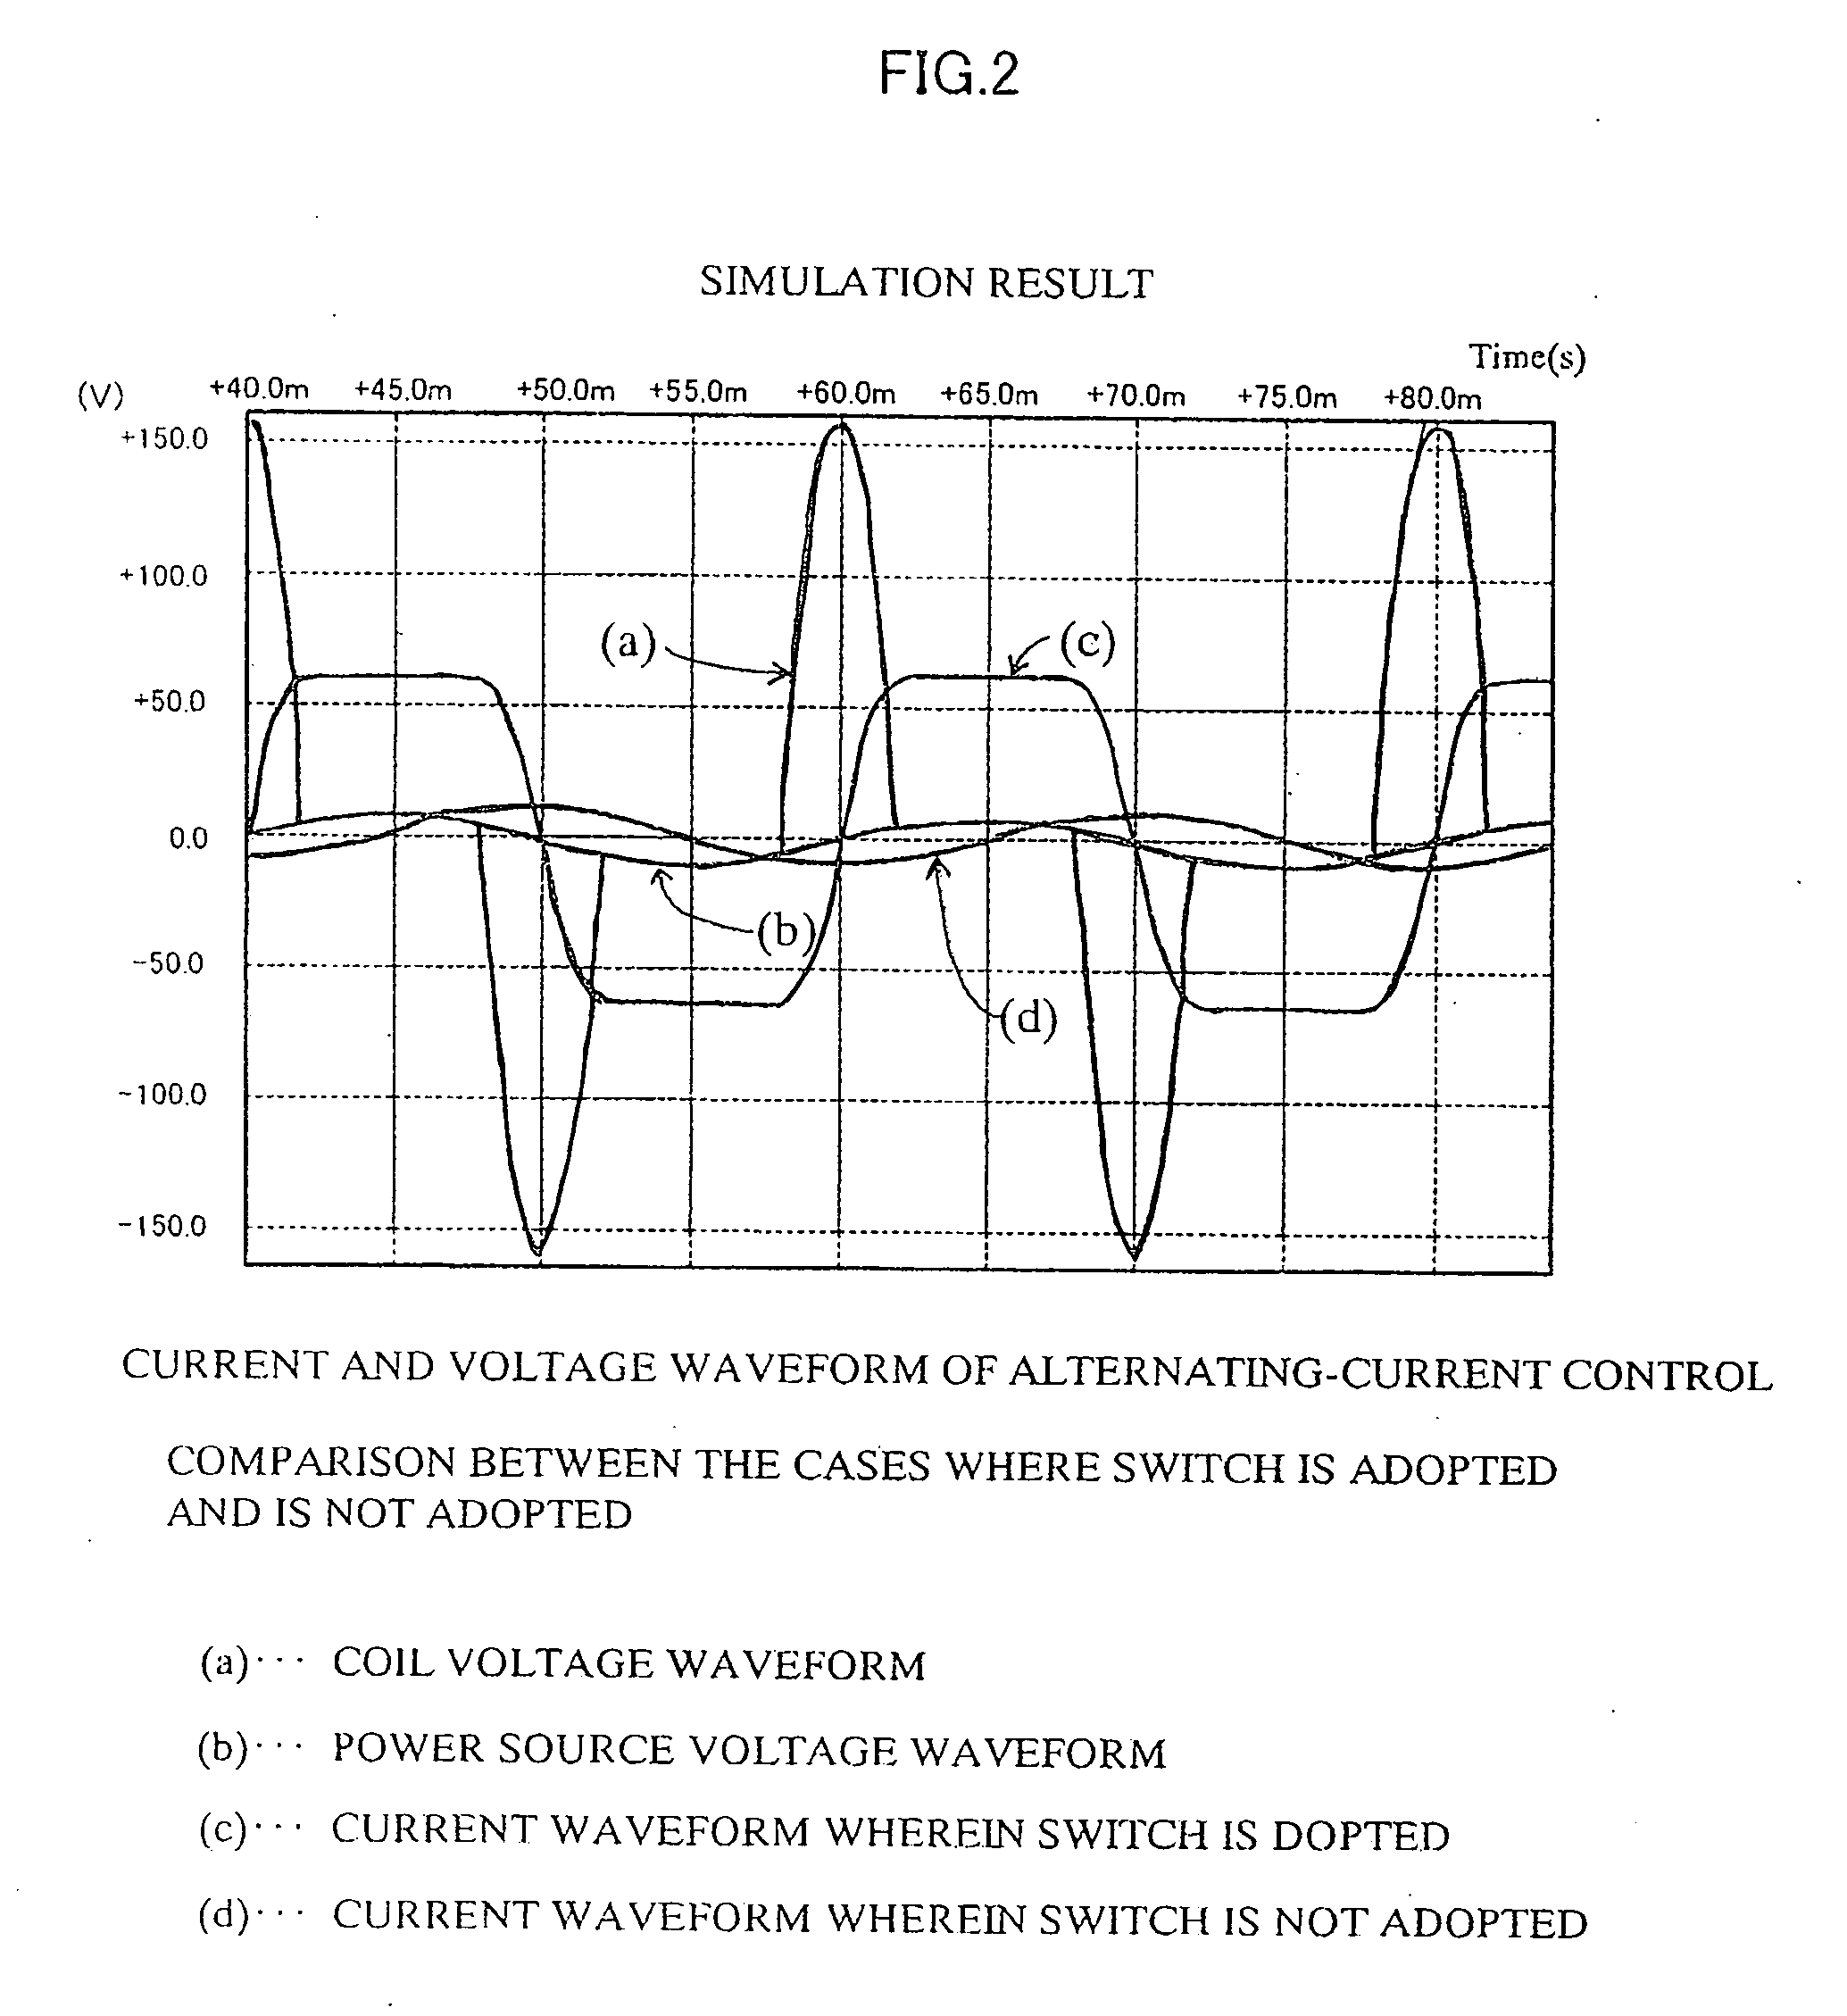 Alternating-current power supply device recovering magnetic energy